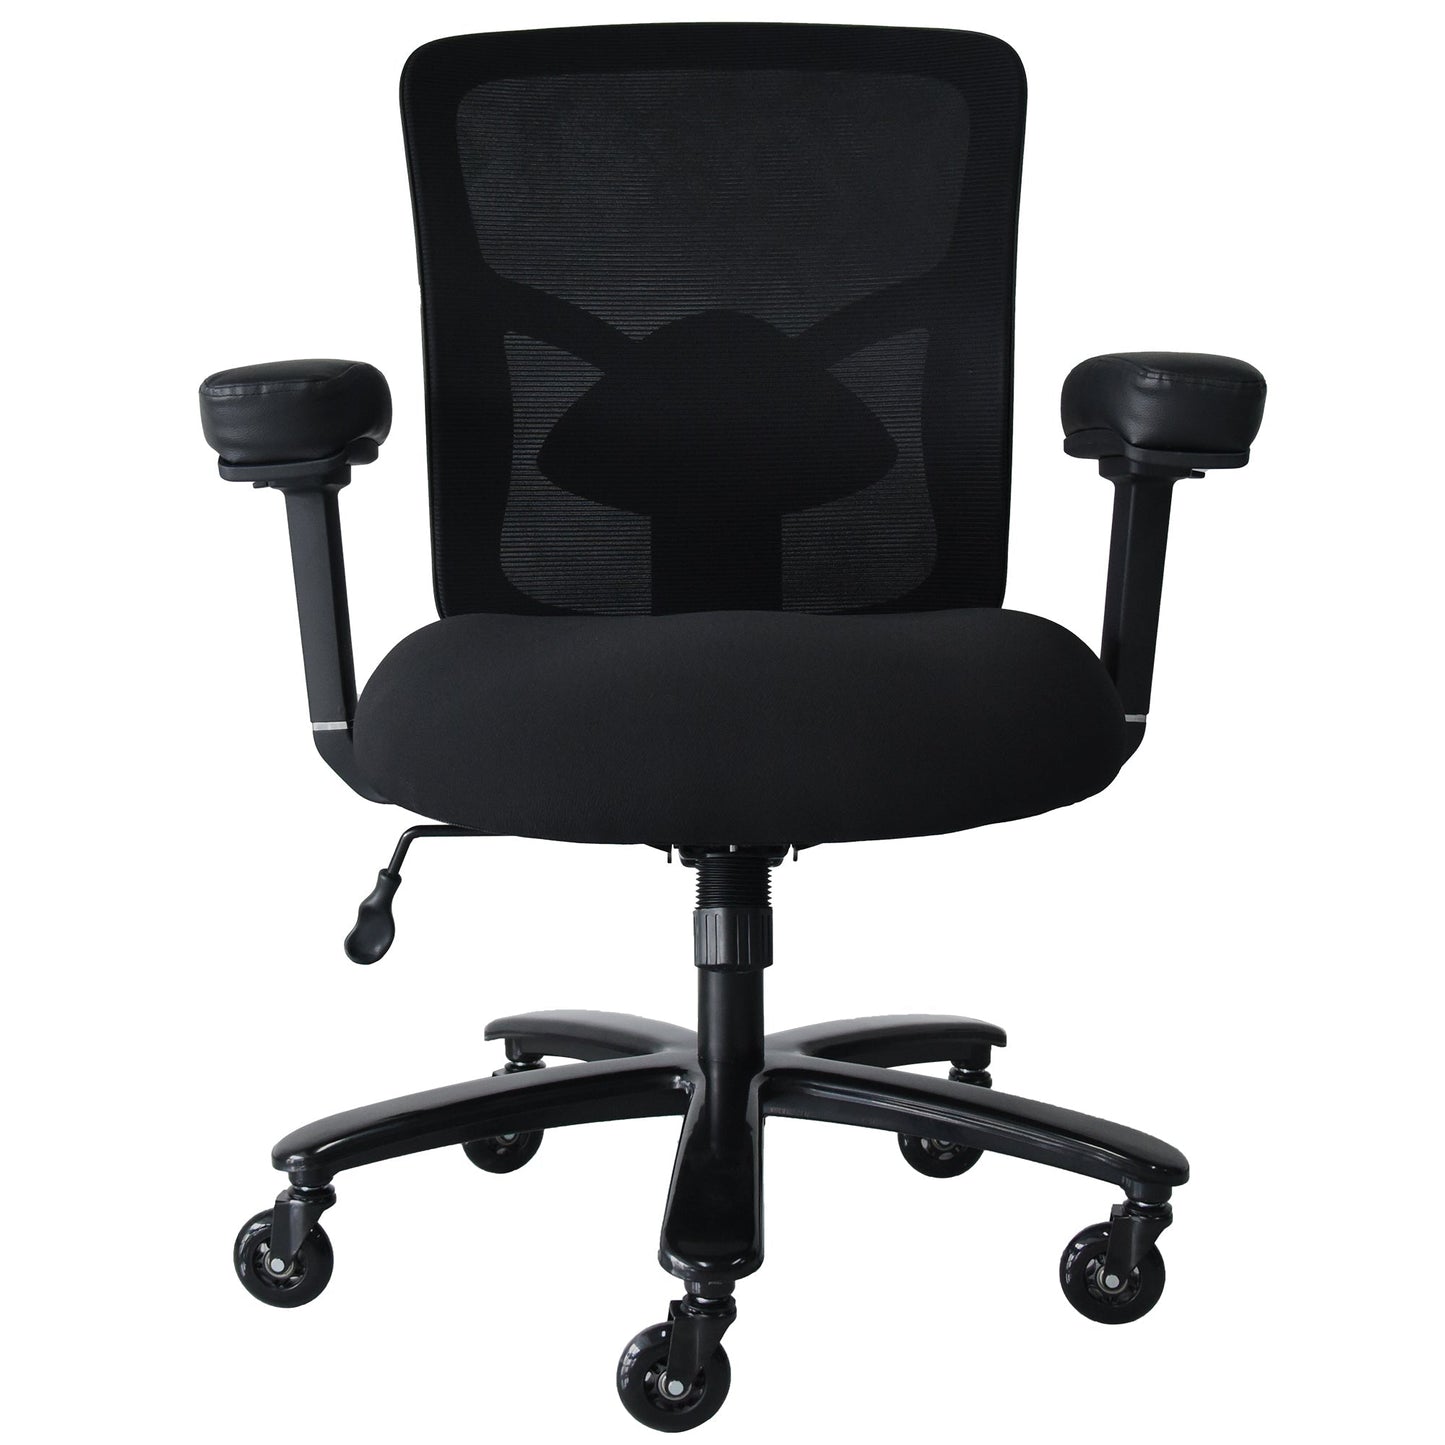 Big and Tall Office Chair 400lbs, Ergonomic Mesh Desk Computer Chair with Adjustable Lumbar Support Arms High Back Wide Seat Task Executive Rolling Swivel Chair for Women Men, Heavy People